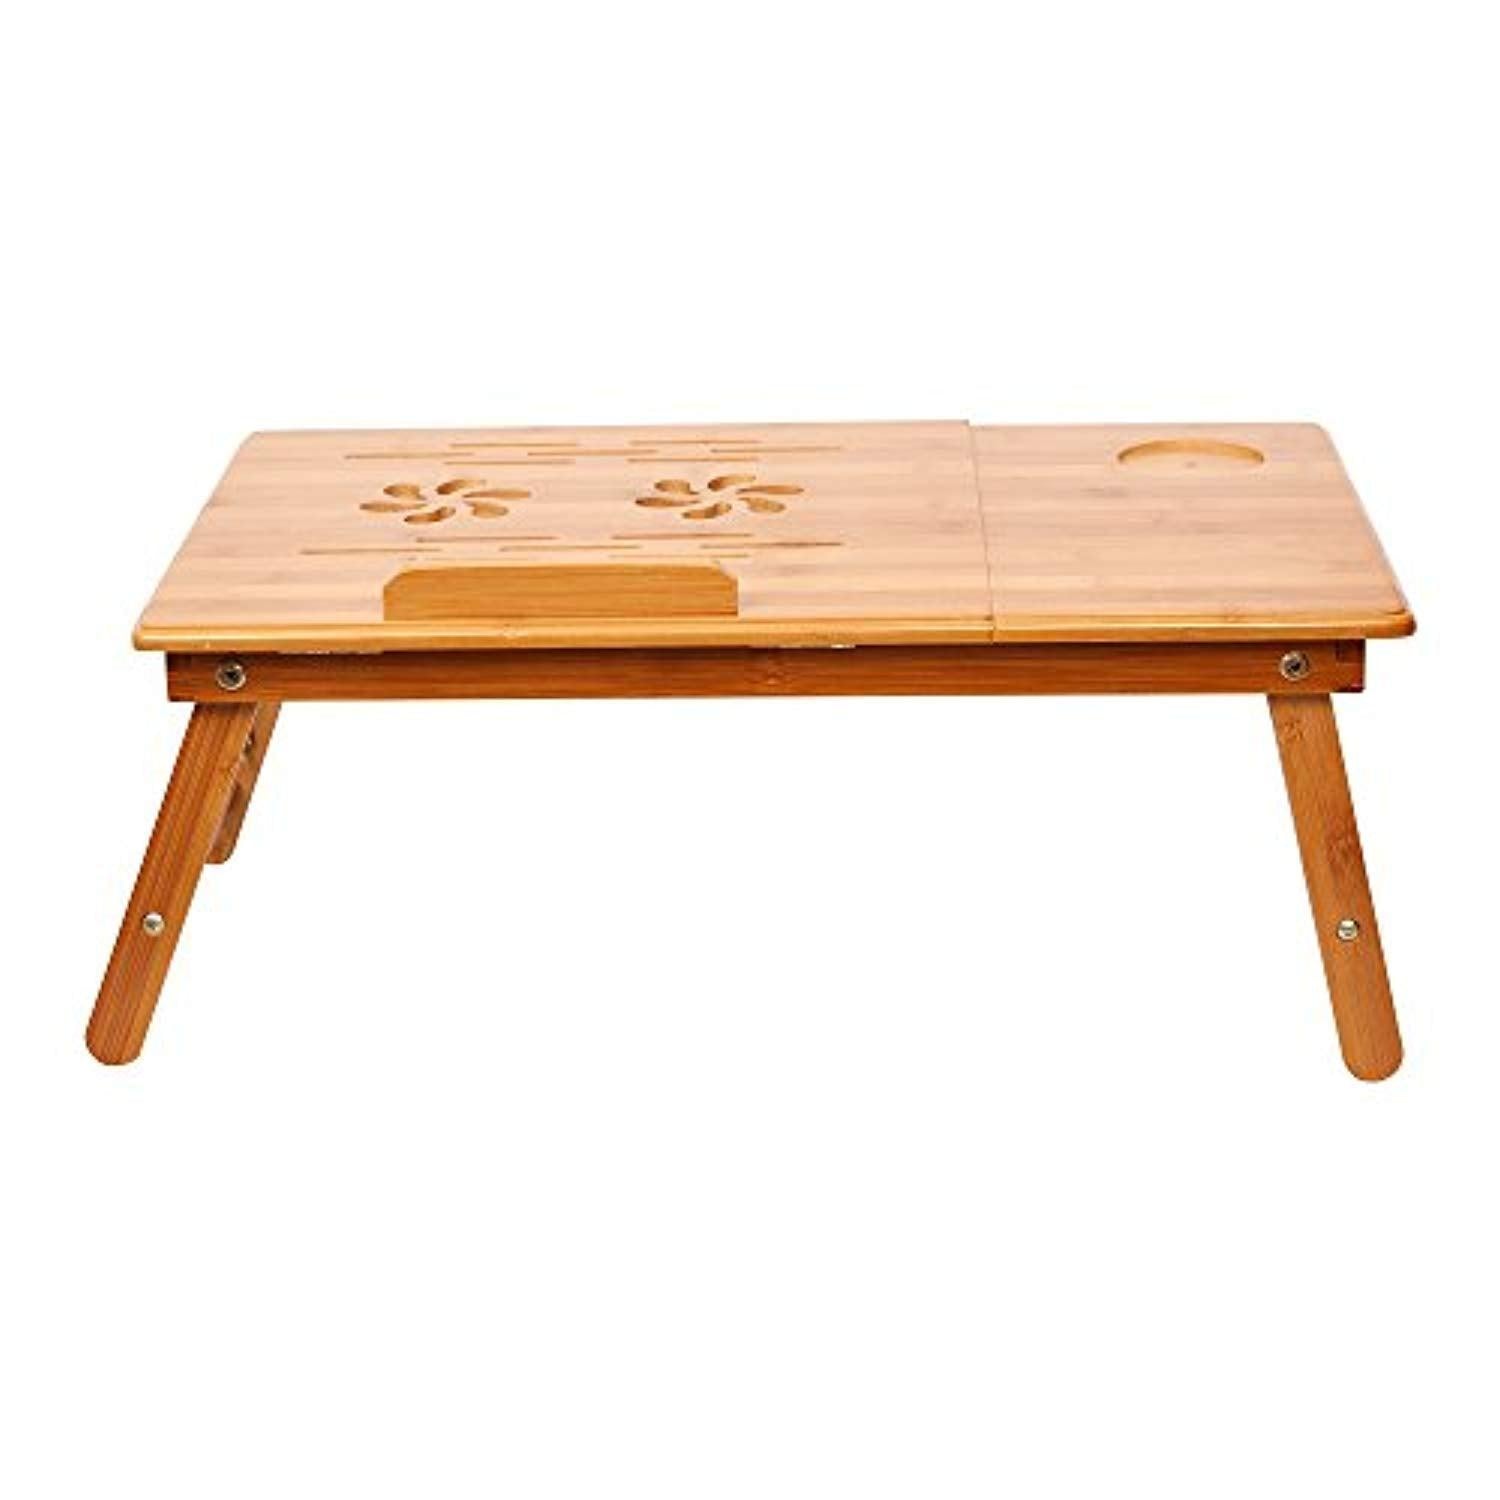 Bosonshop Adjustable Bamboo Laptop Desk Foldable Breakfast Table with Tilting Top Drawer,Eco Friendly